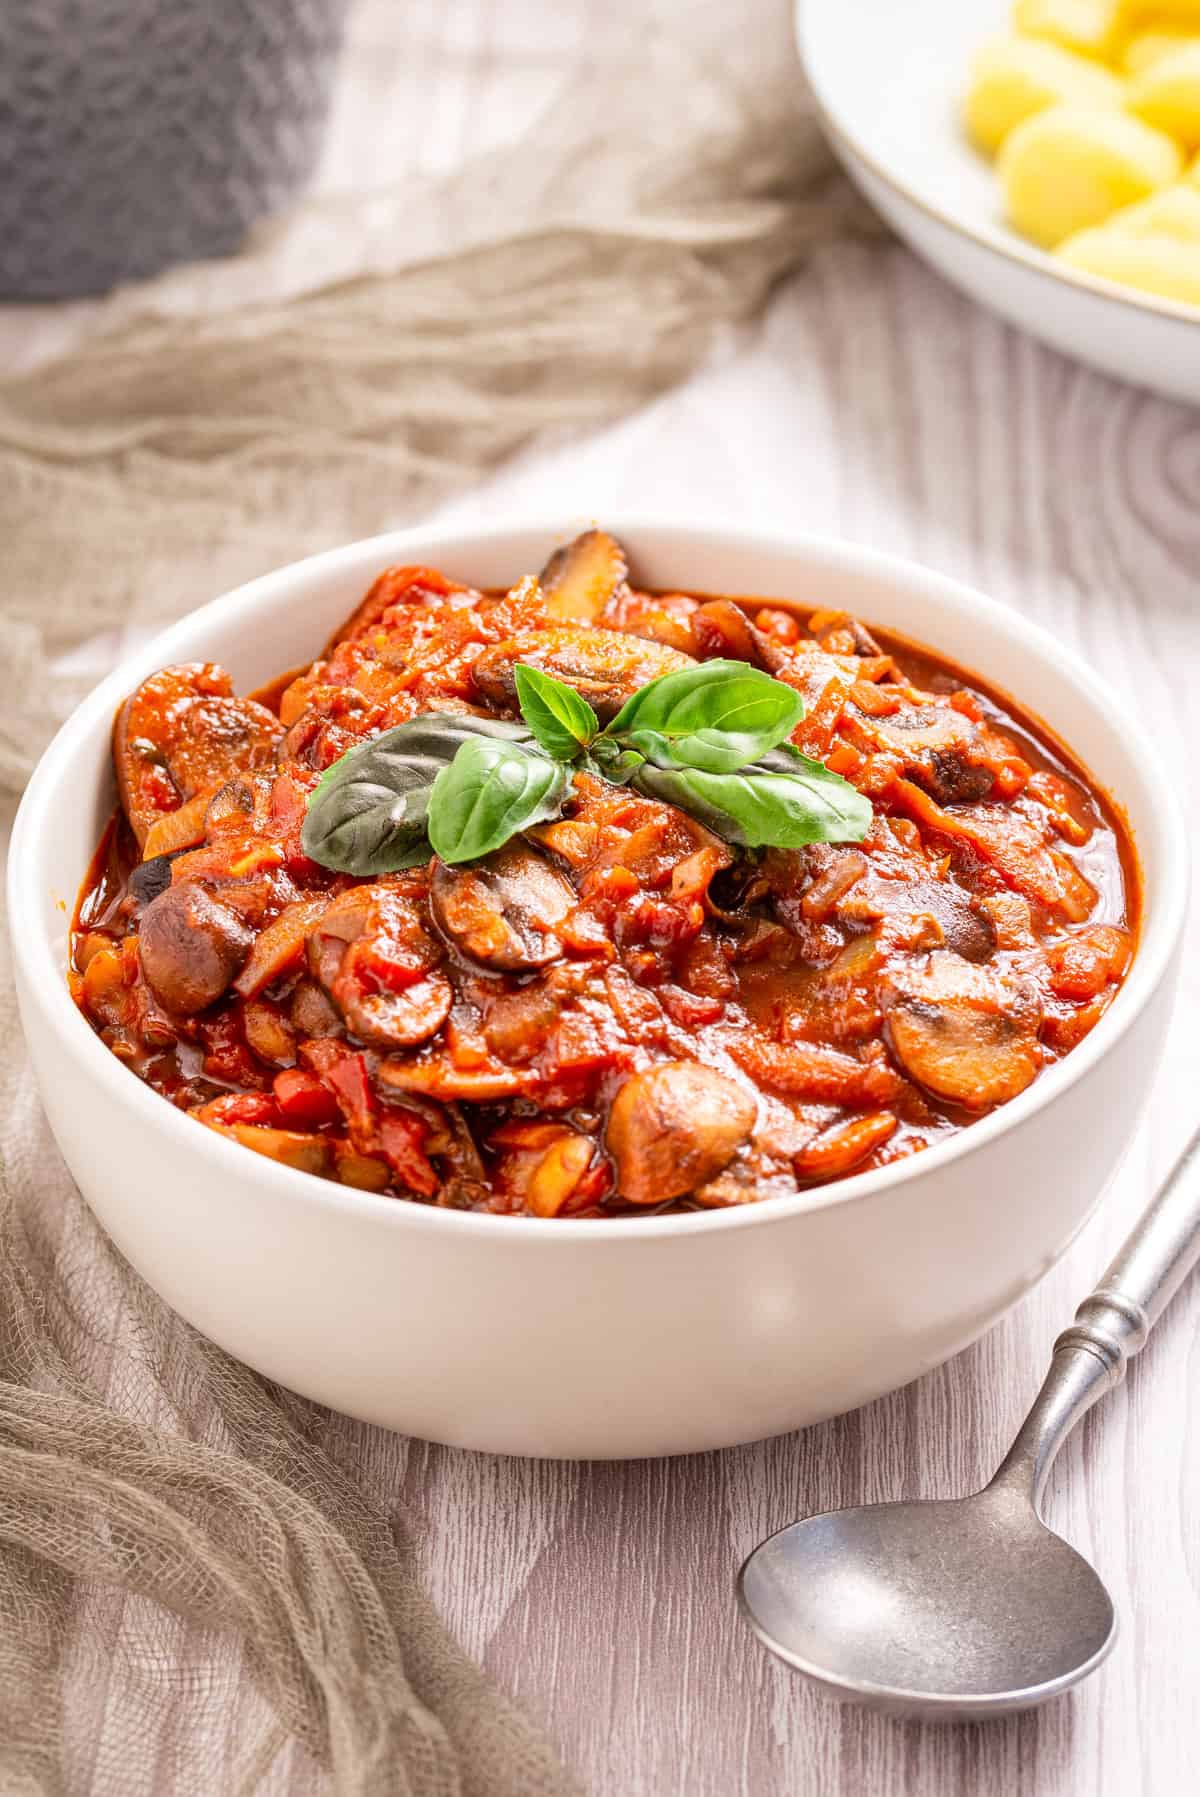 An image of mushroom ragu in a white bowl with a garnish of basil on top.